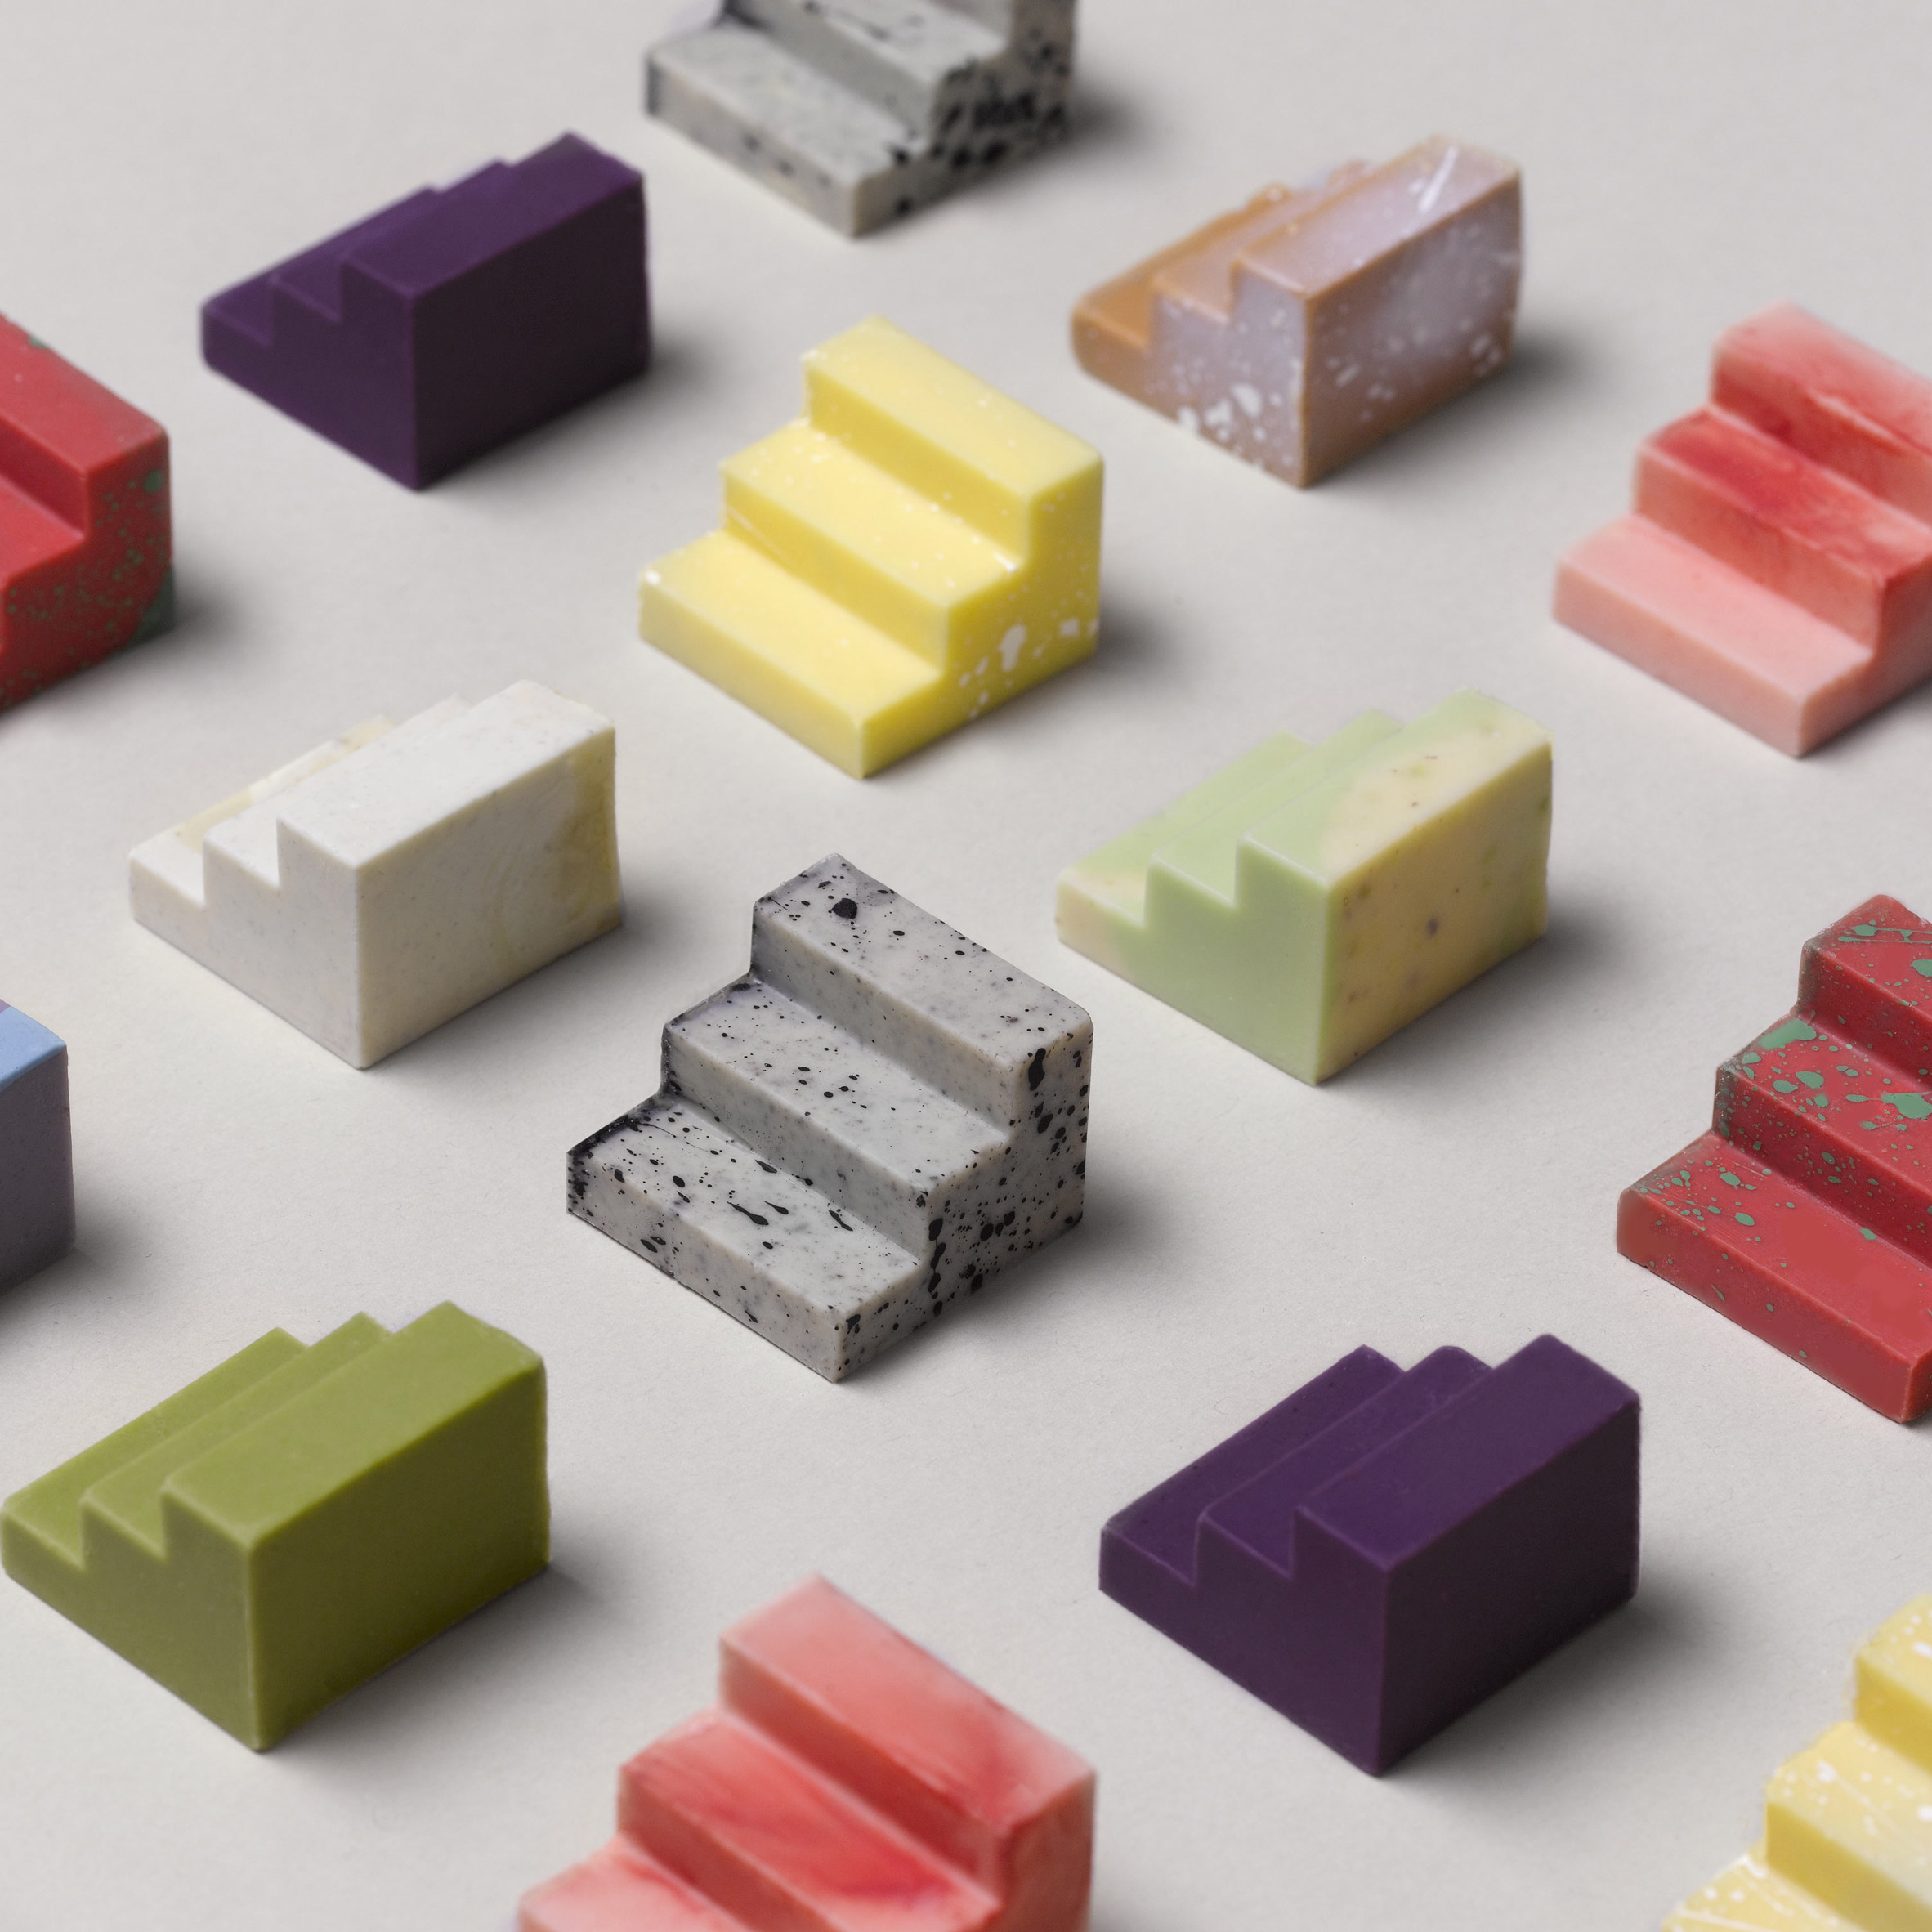 Universal Favourite produces colourful chocolates from 3D-printed moulds